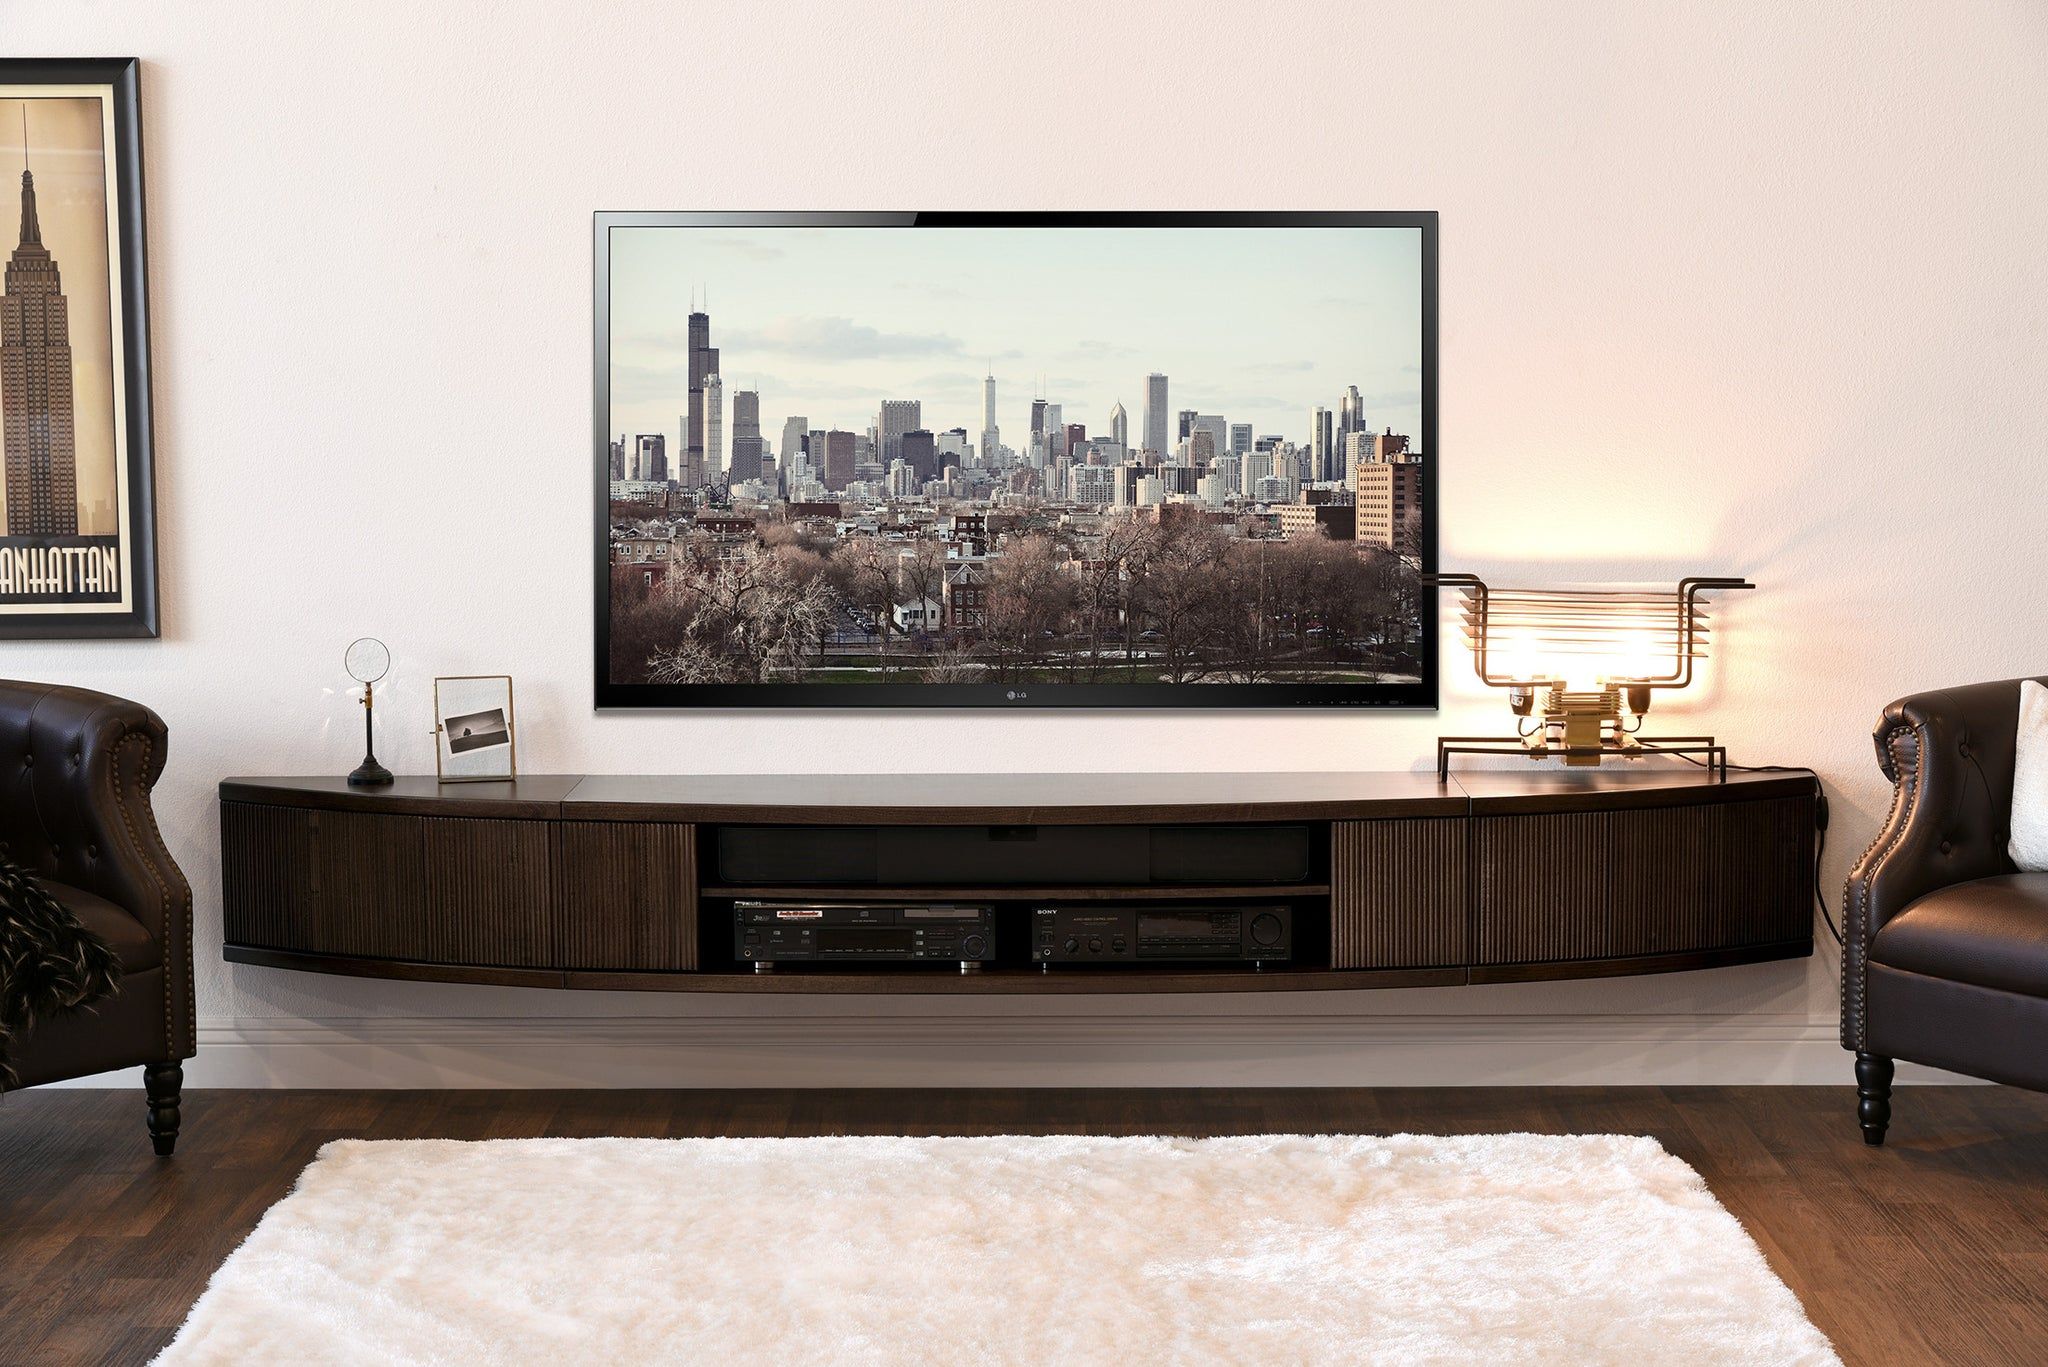 Wall Mount Floating Entertainment Center Tv Stand – Arc – Espresso In Wall Mounted Floating Tv Stands (View 3 of 20)